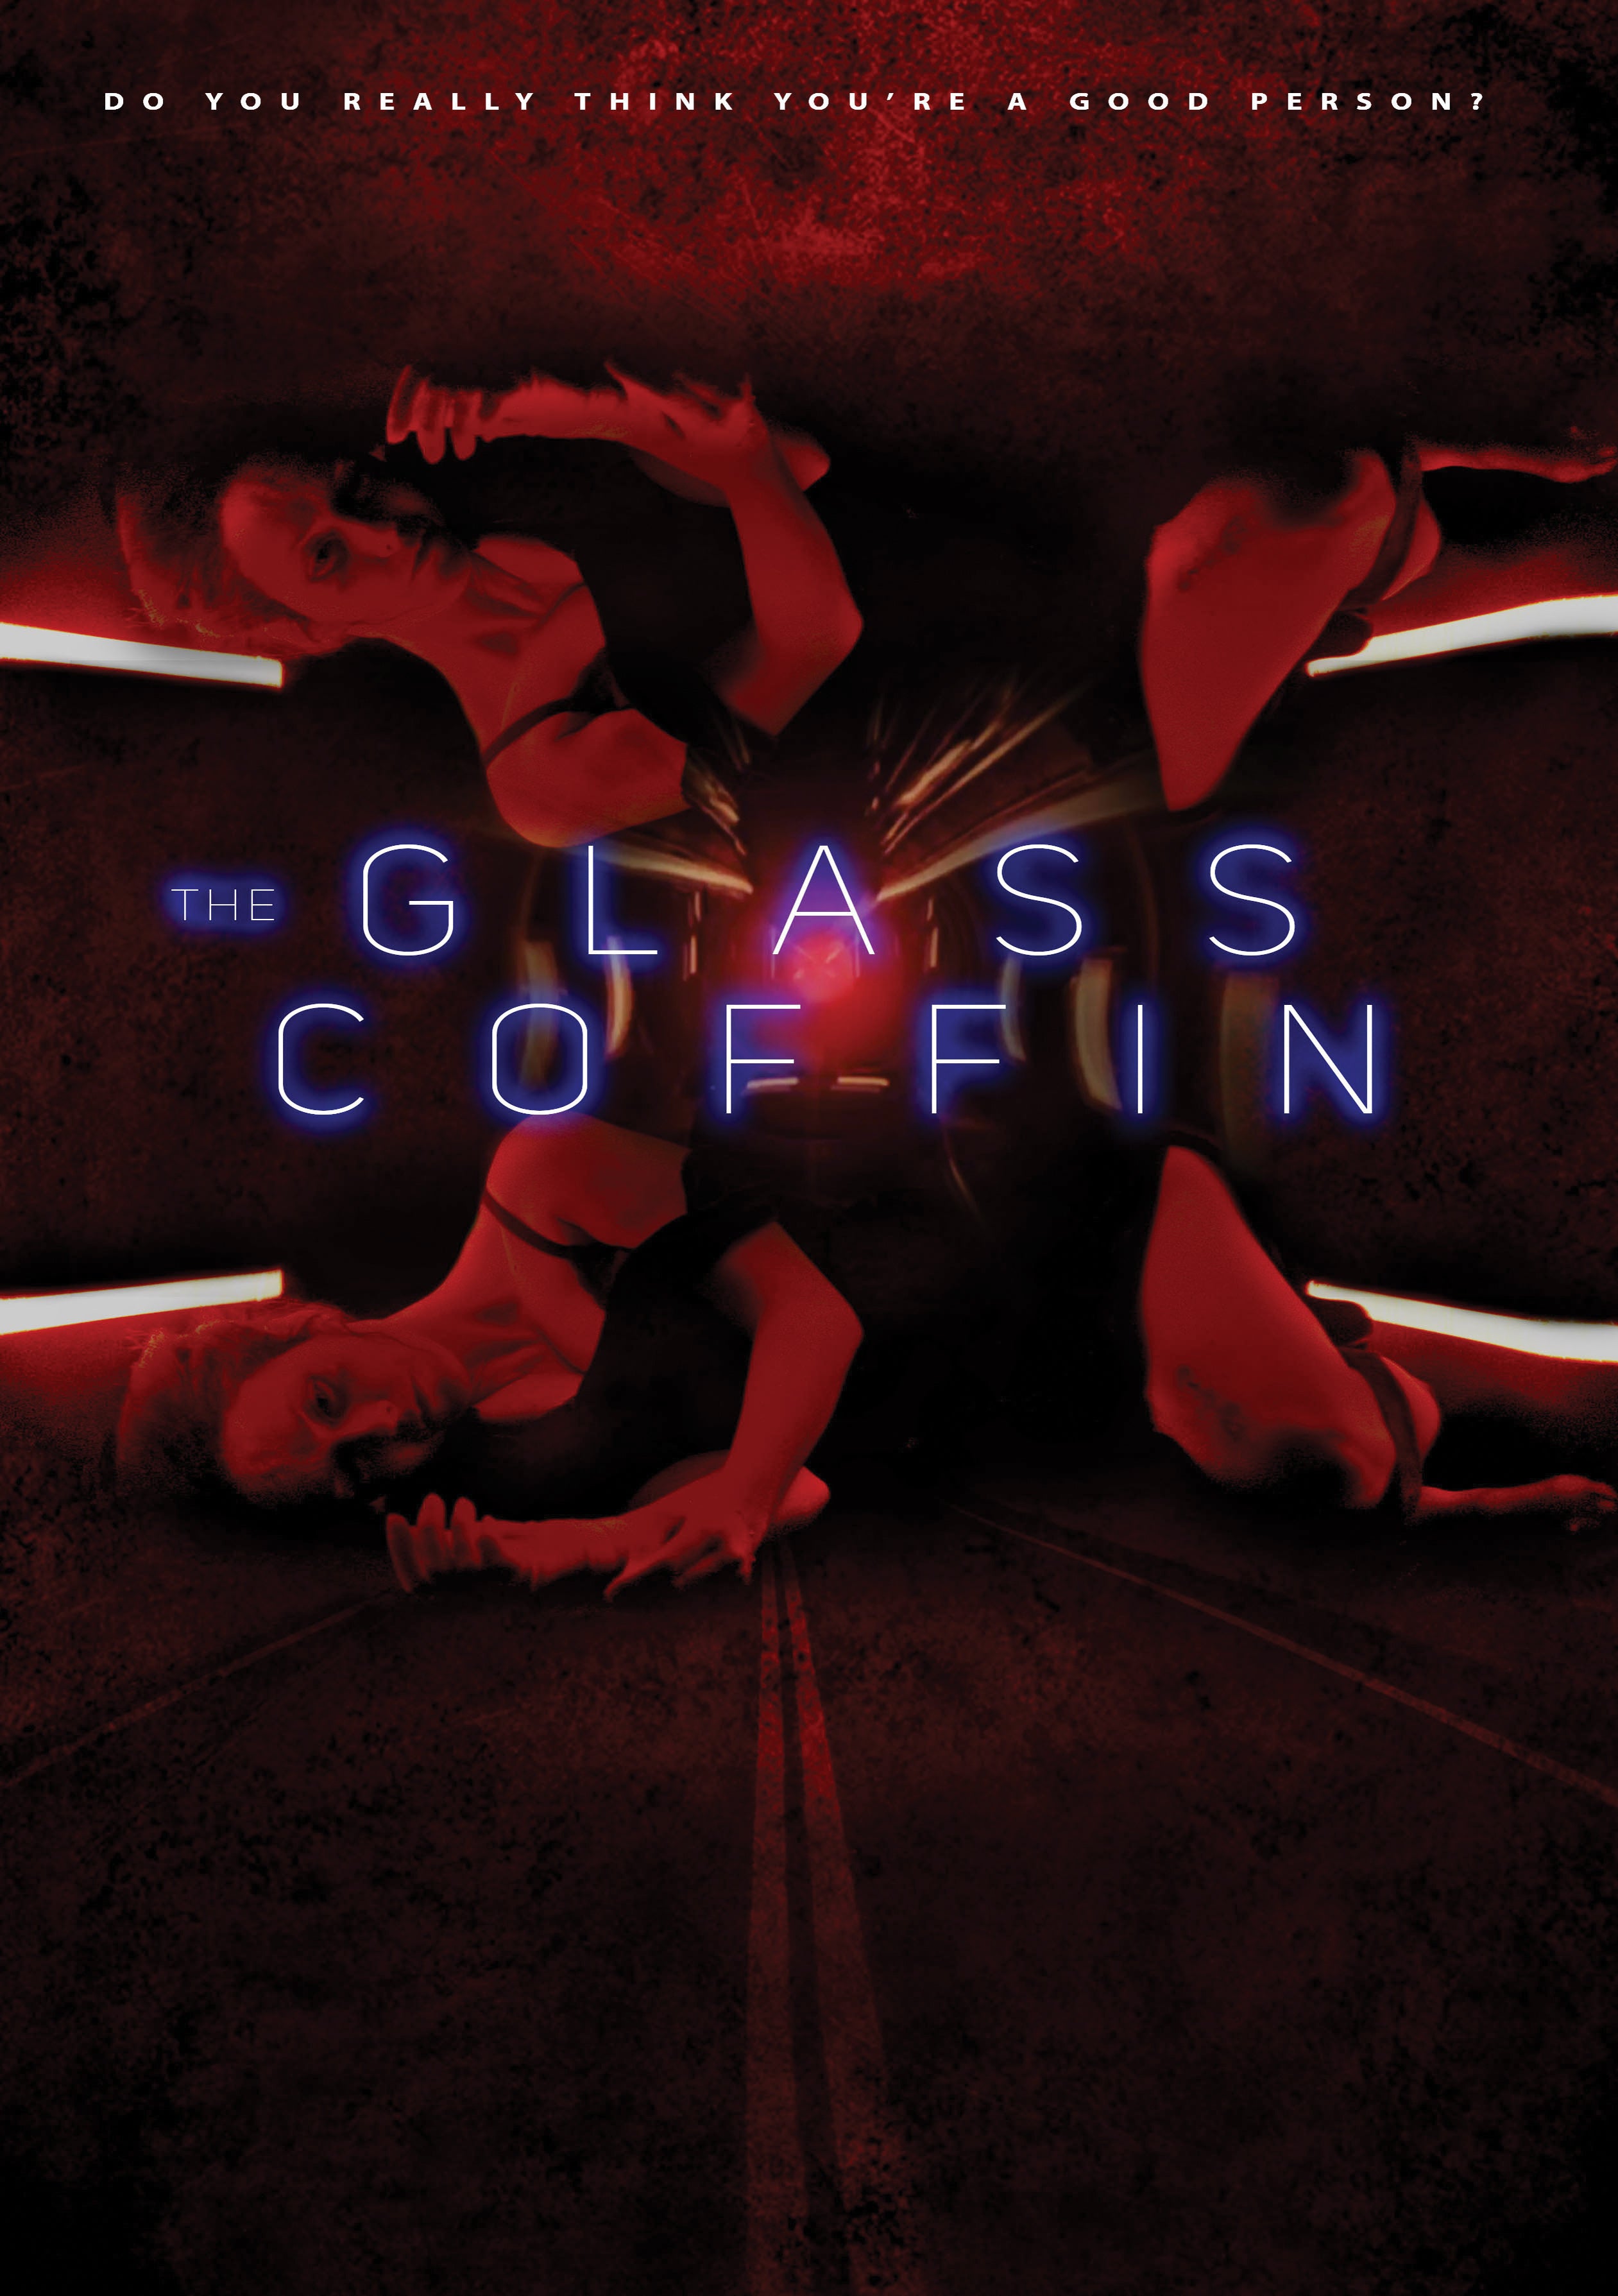 THE GLASS COFFIN DVD